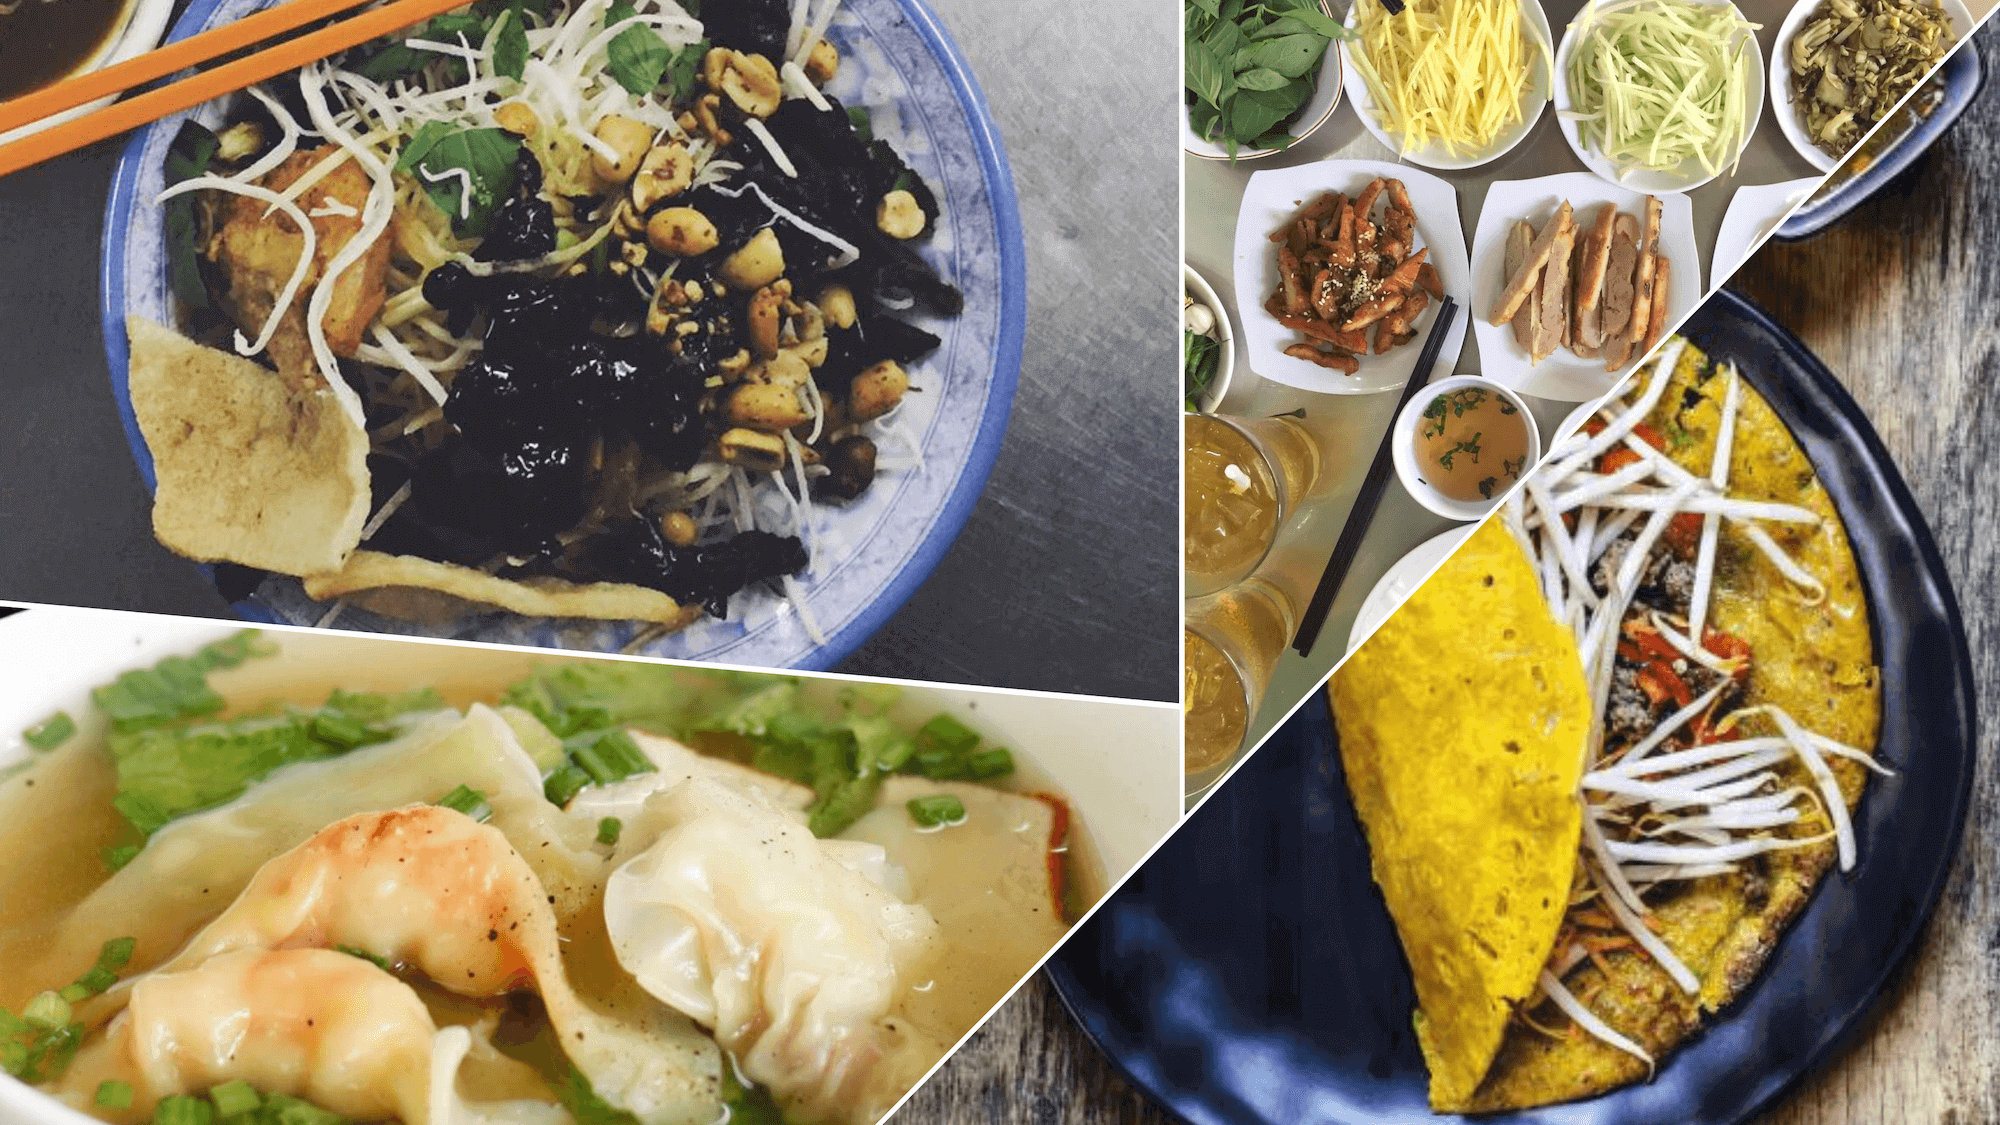 Afternoon snacks in Ho Chi Minh City - The Broad Life